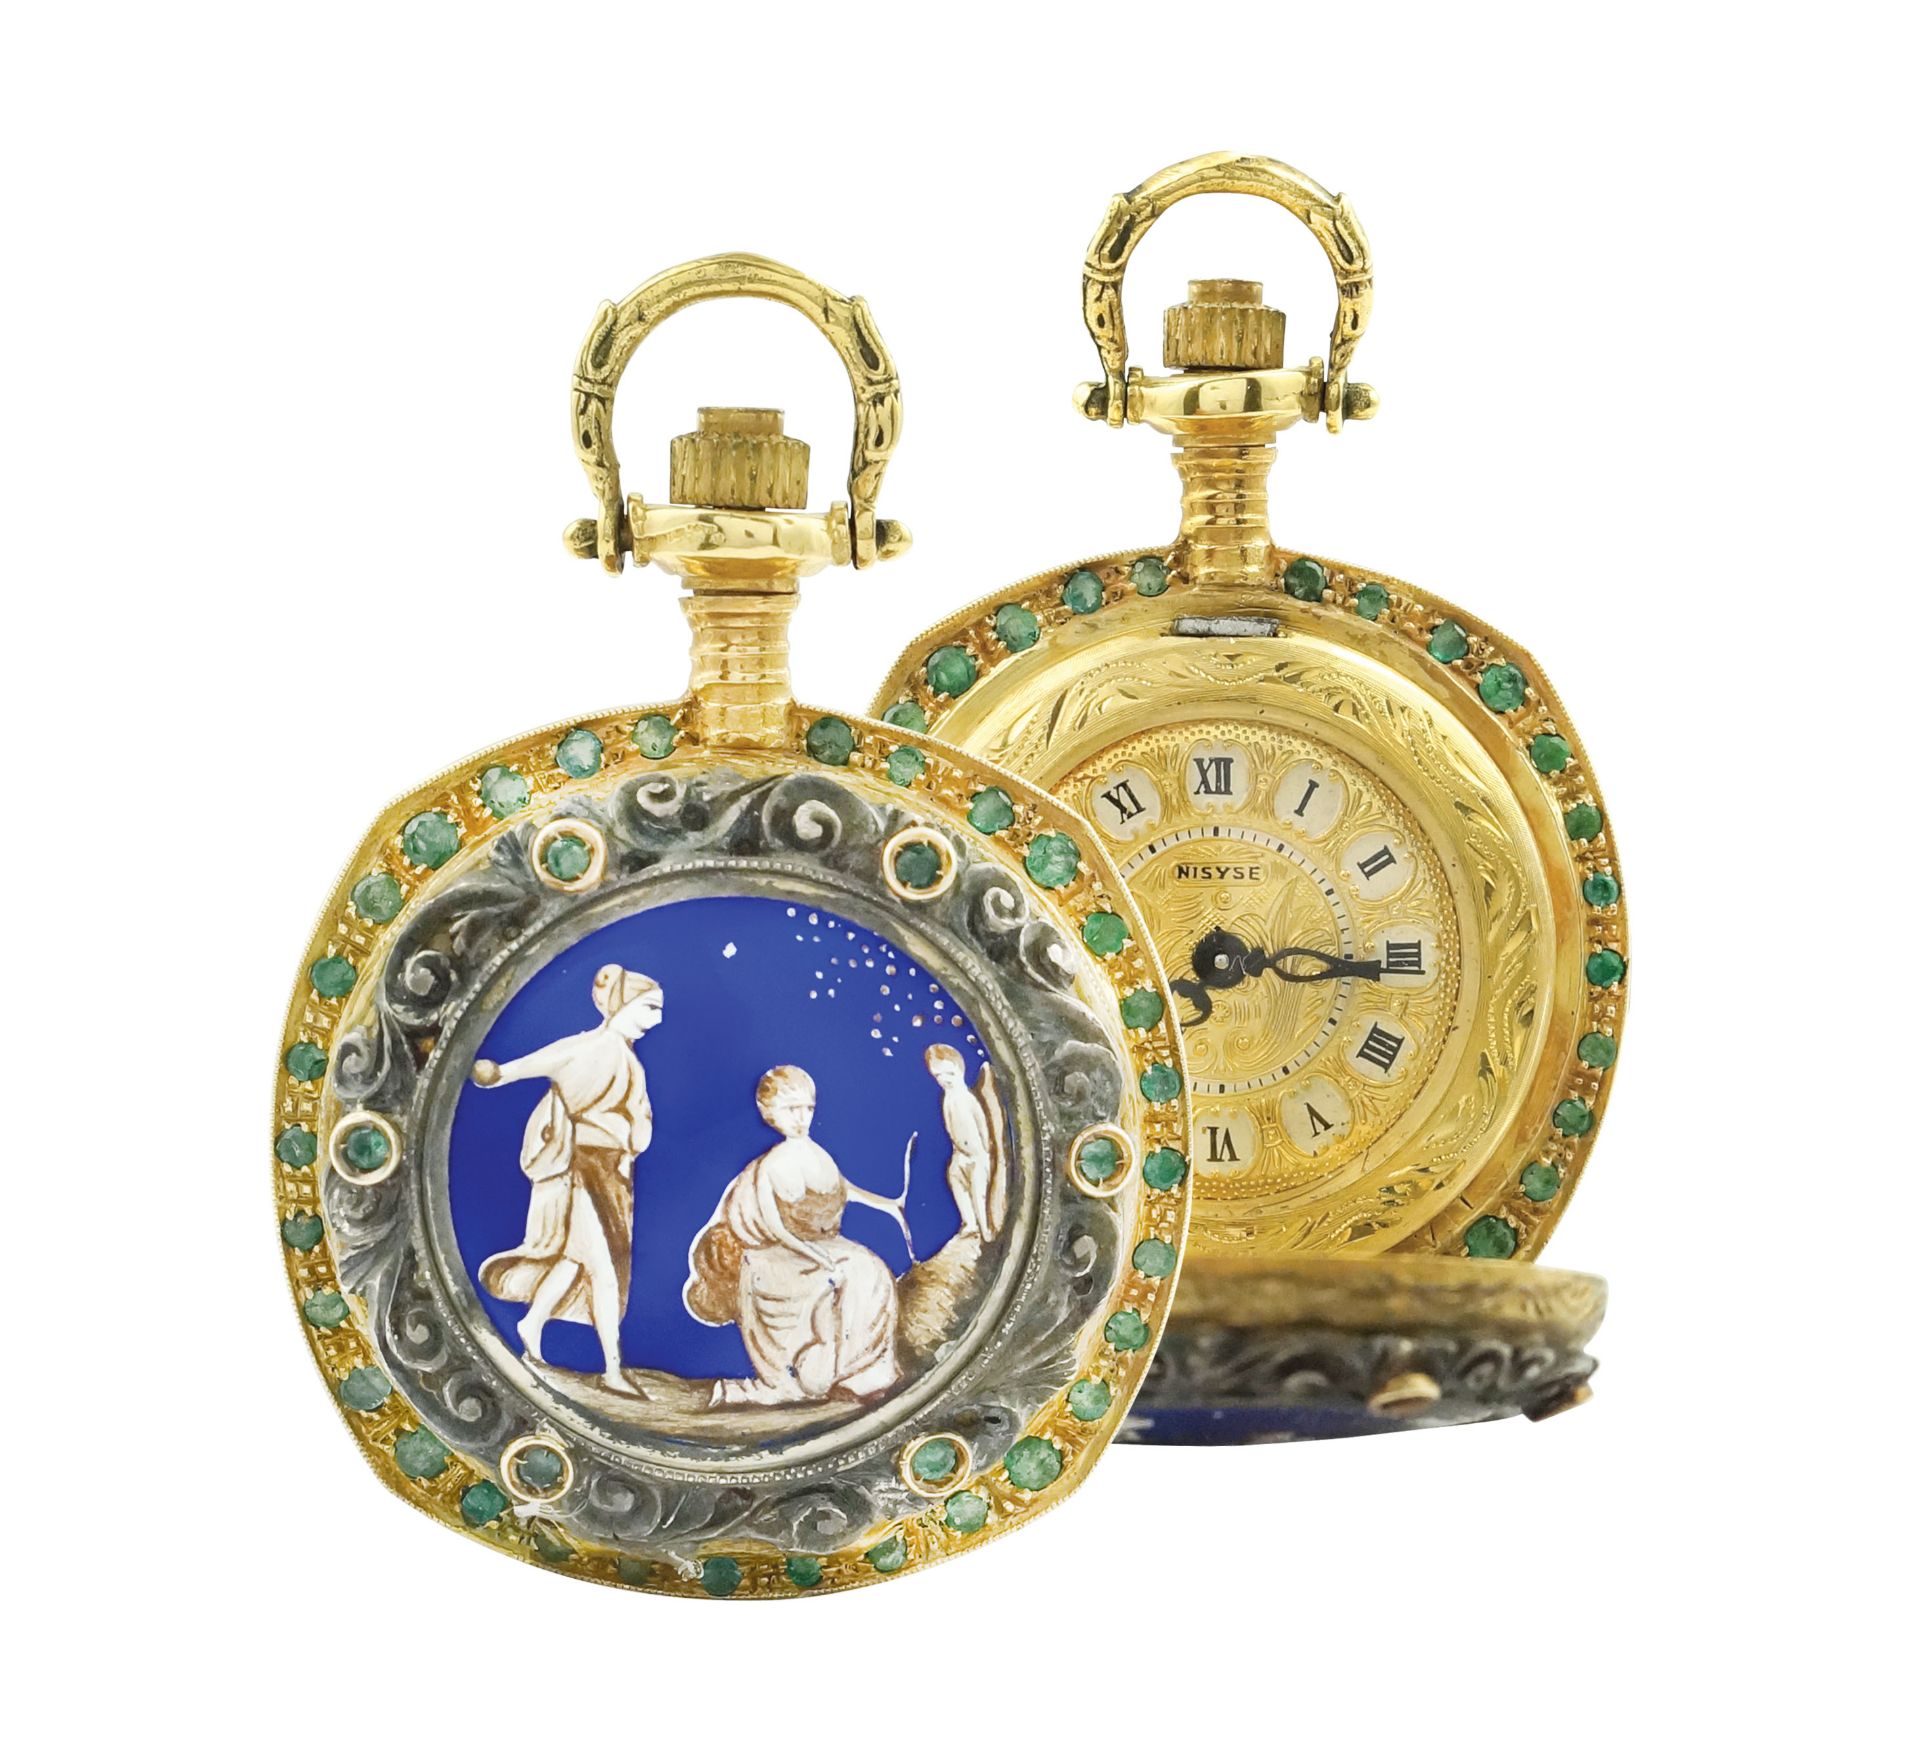 A Nisyse gold, silver and enamel pocket watch